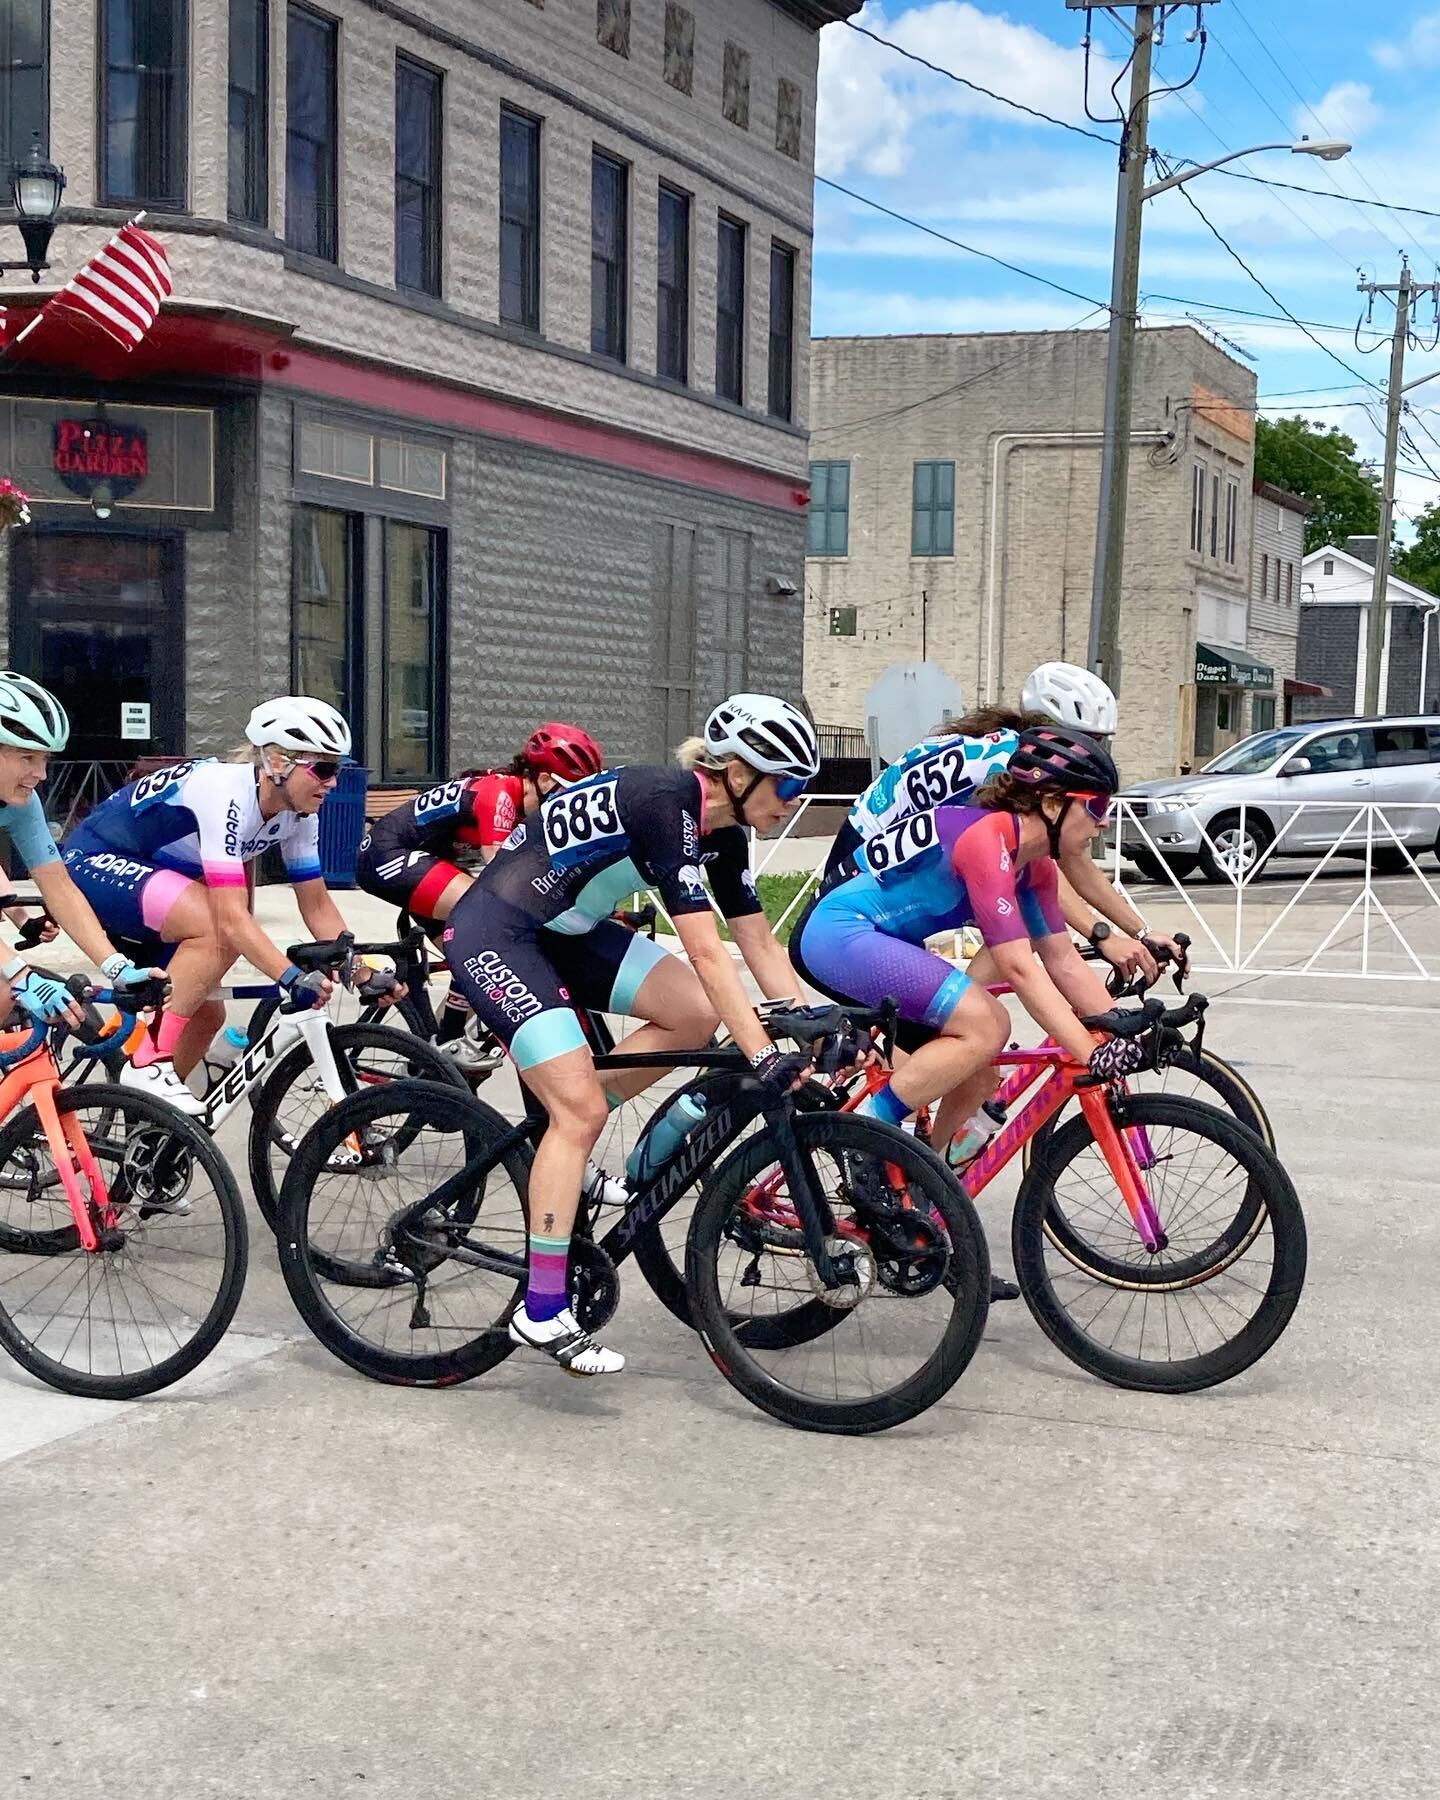 The temperature was cooler today but Day 4 of @tourofamericasdairyland was hot and spicy. Hannah floated her way around the field like a pro and Austin stayed calm, strong, and collected - earning herself another day in the W 2/3 leaders jersey.

We&